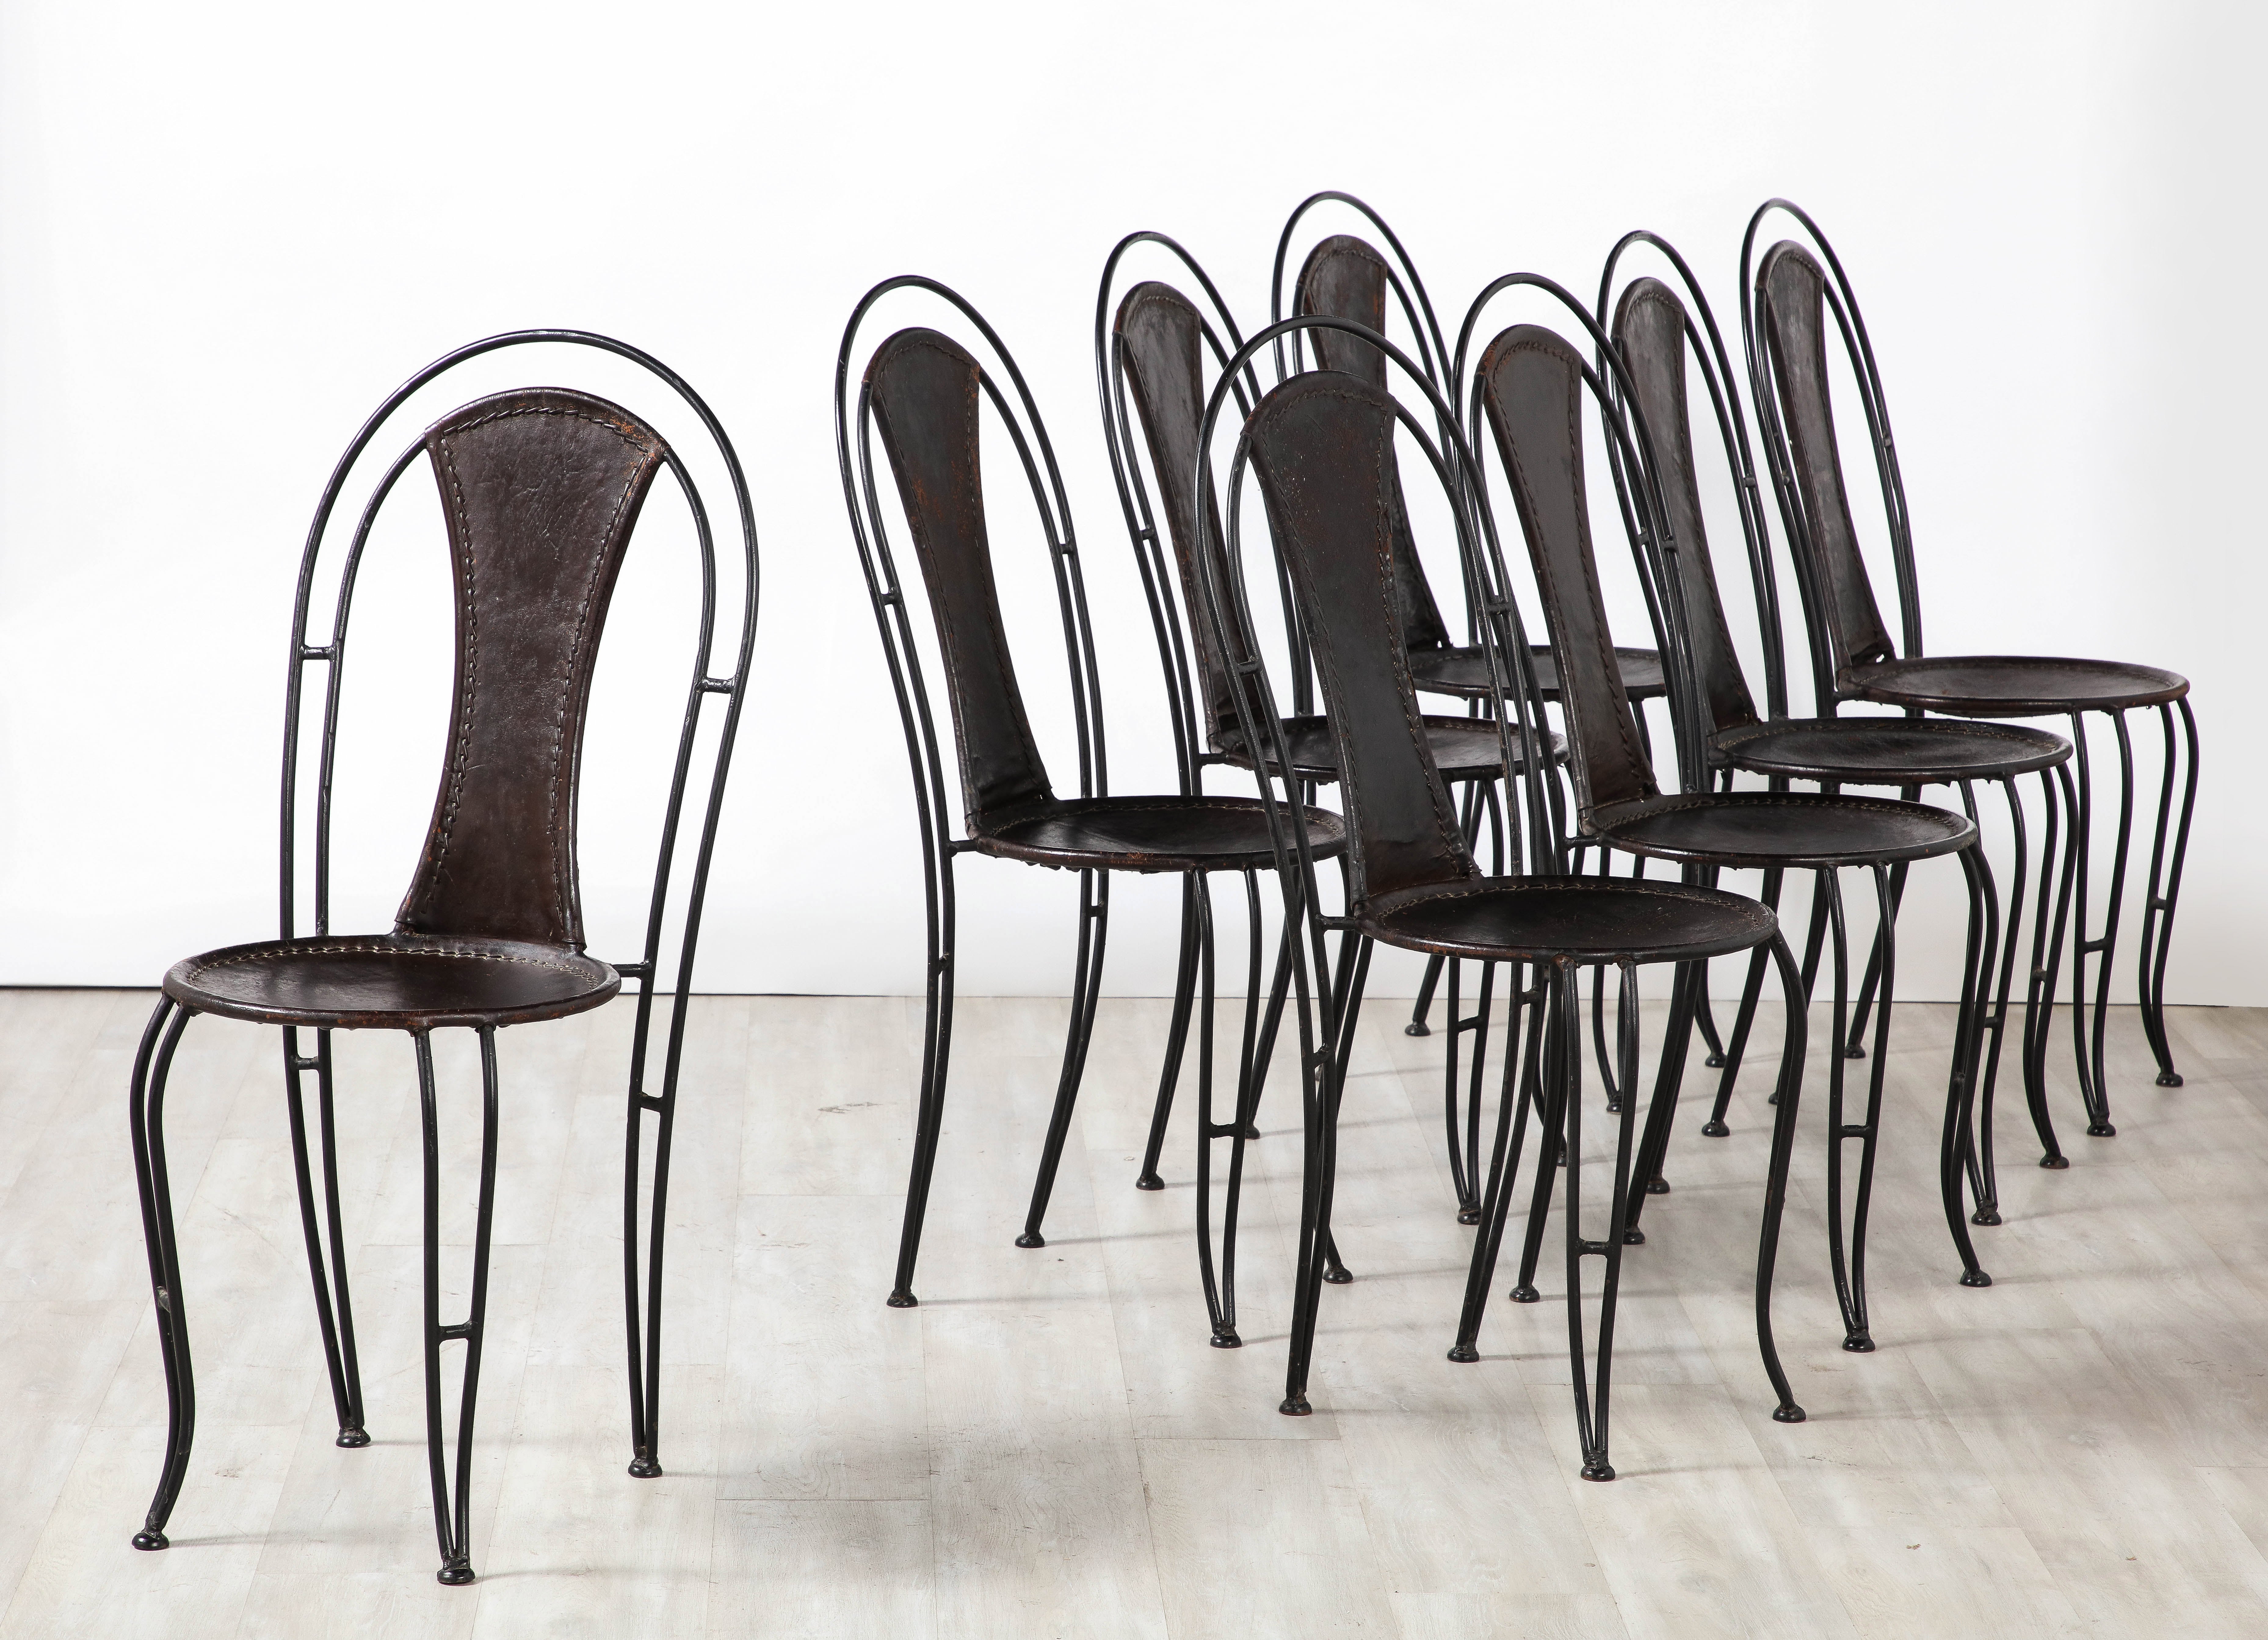 An Italian set of eight black leather and metal bistro chairs/ dining chairs. The chairs are highly sculptural with arched backs, circular seats and fanciful scrolled legs. The black hand-stitched leather is all original, truly beautiful patina.